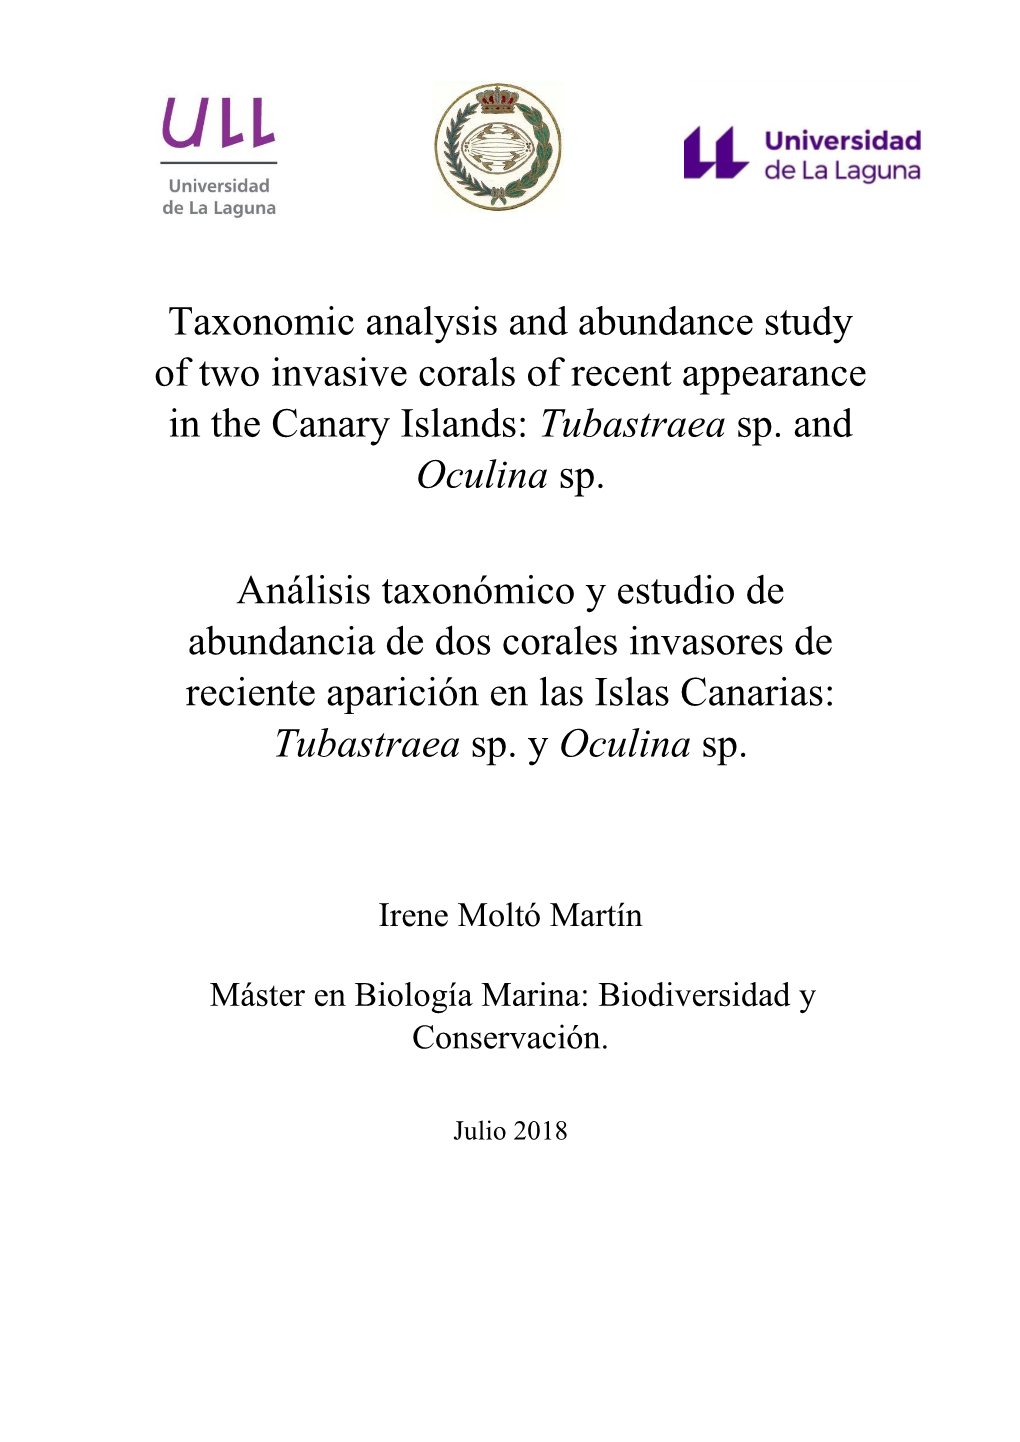 Taxonomic Analysis and Abundance Study of Two Invasive Corals of Recent Appearance in the Canary Islands: Tubastraea Sp